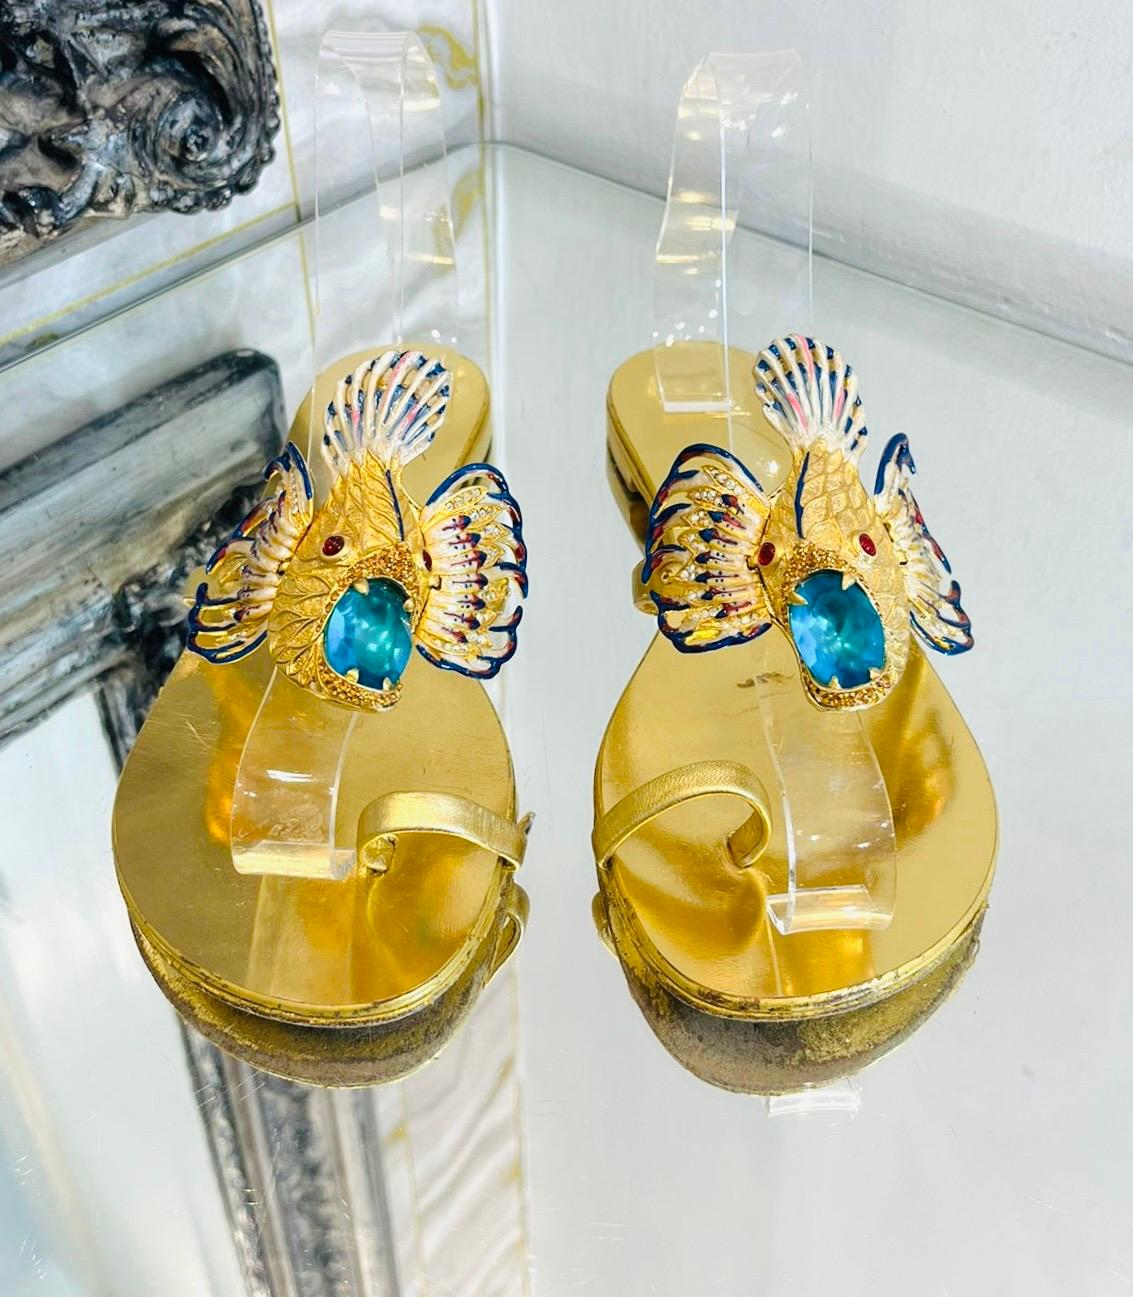 Giuseppe Zanotti Metallic Leather Embellished Sandals

Iconic sandals crafted from laminated leather and detailed with 'Spipiott' accessory covered in colourful crystals.

Featuring single toe strap and short heel. Rrp £1345

Size – 37

Condition –